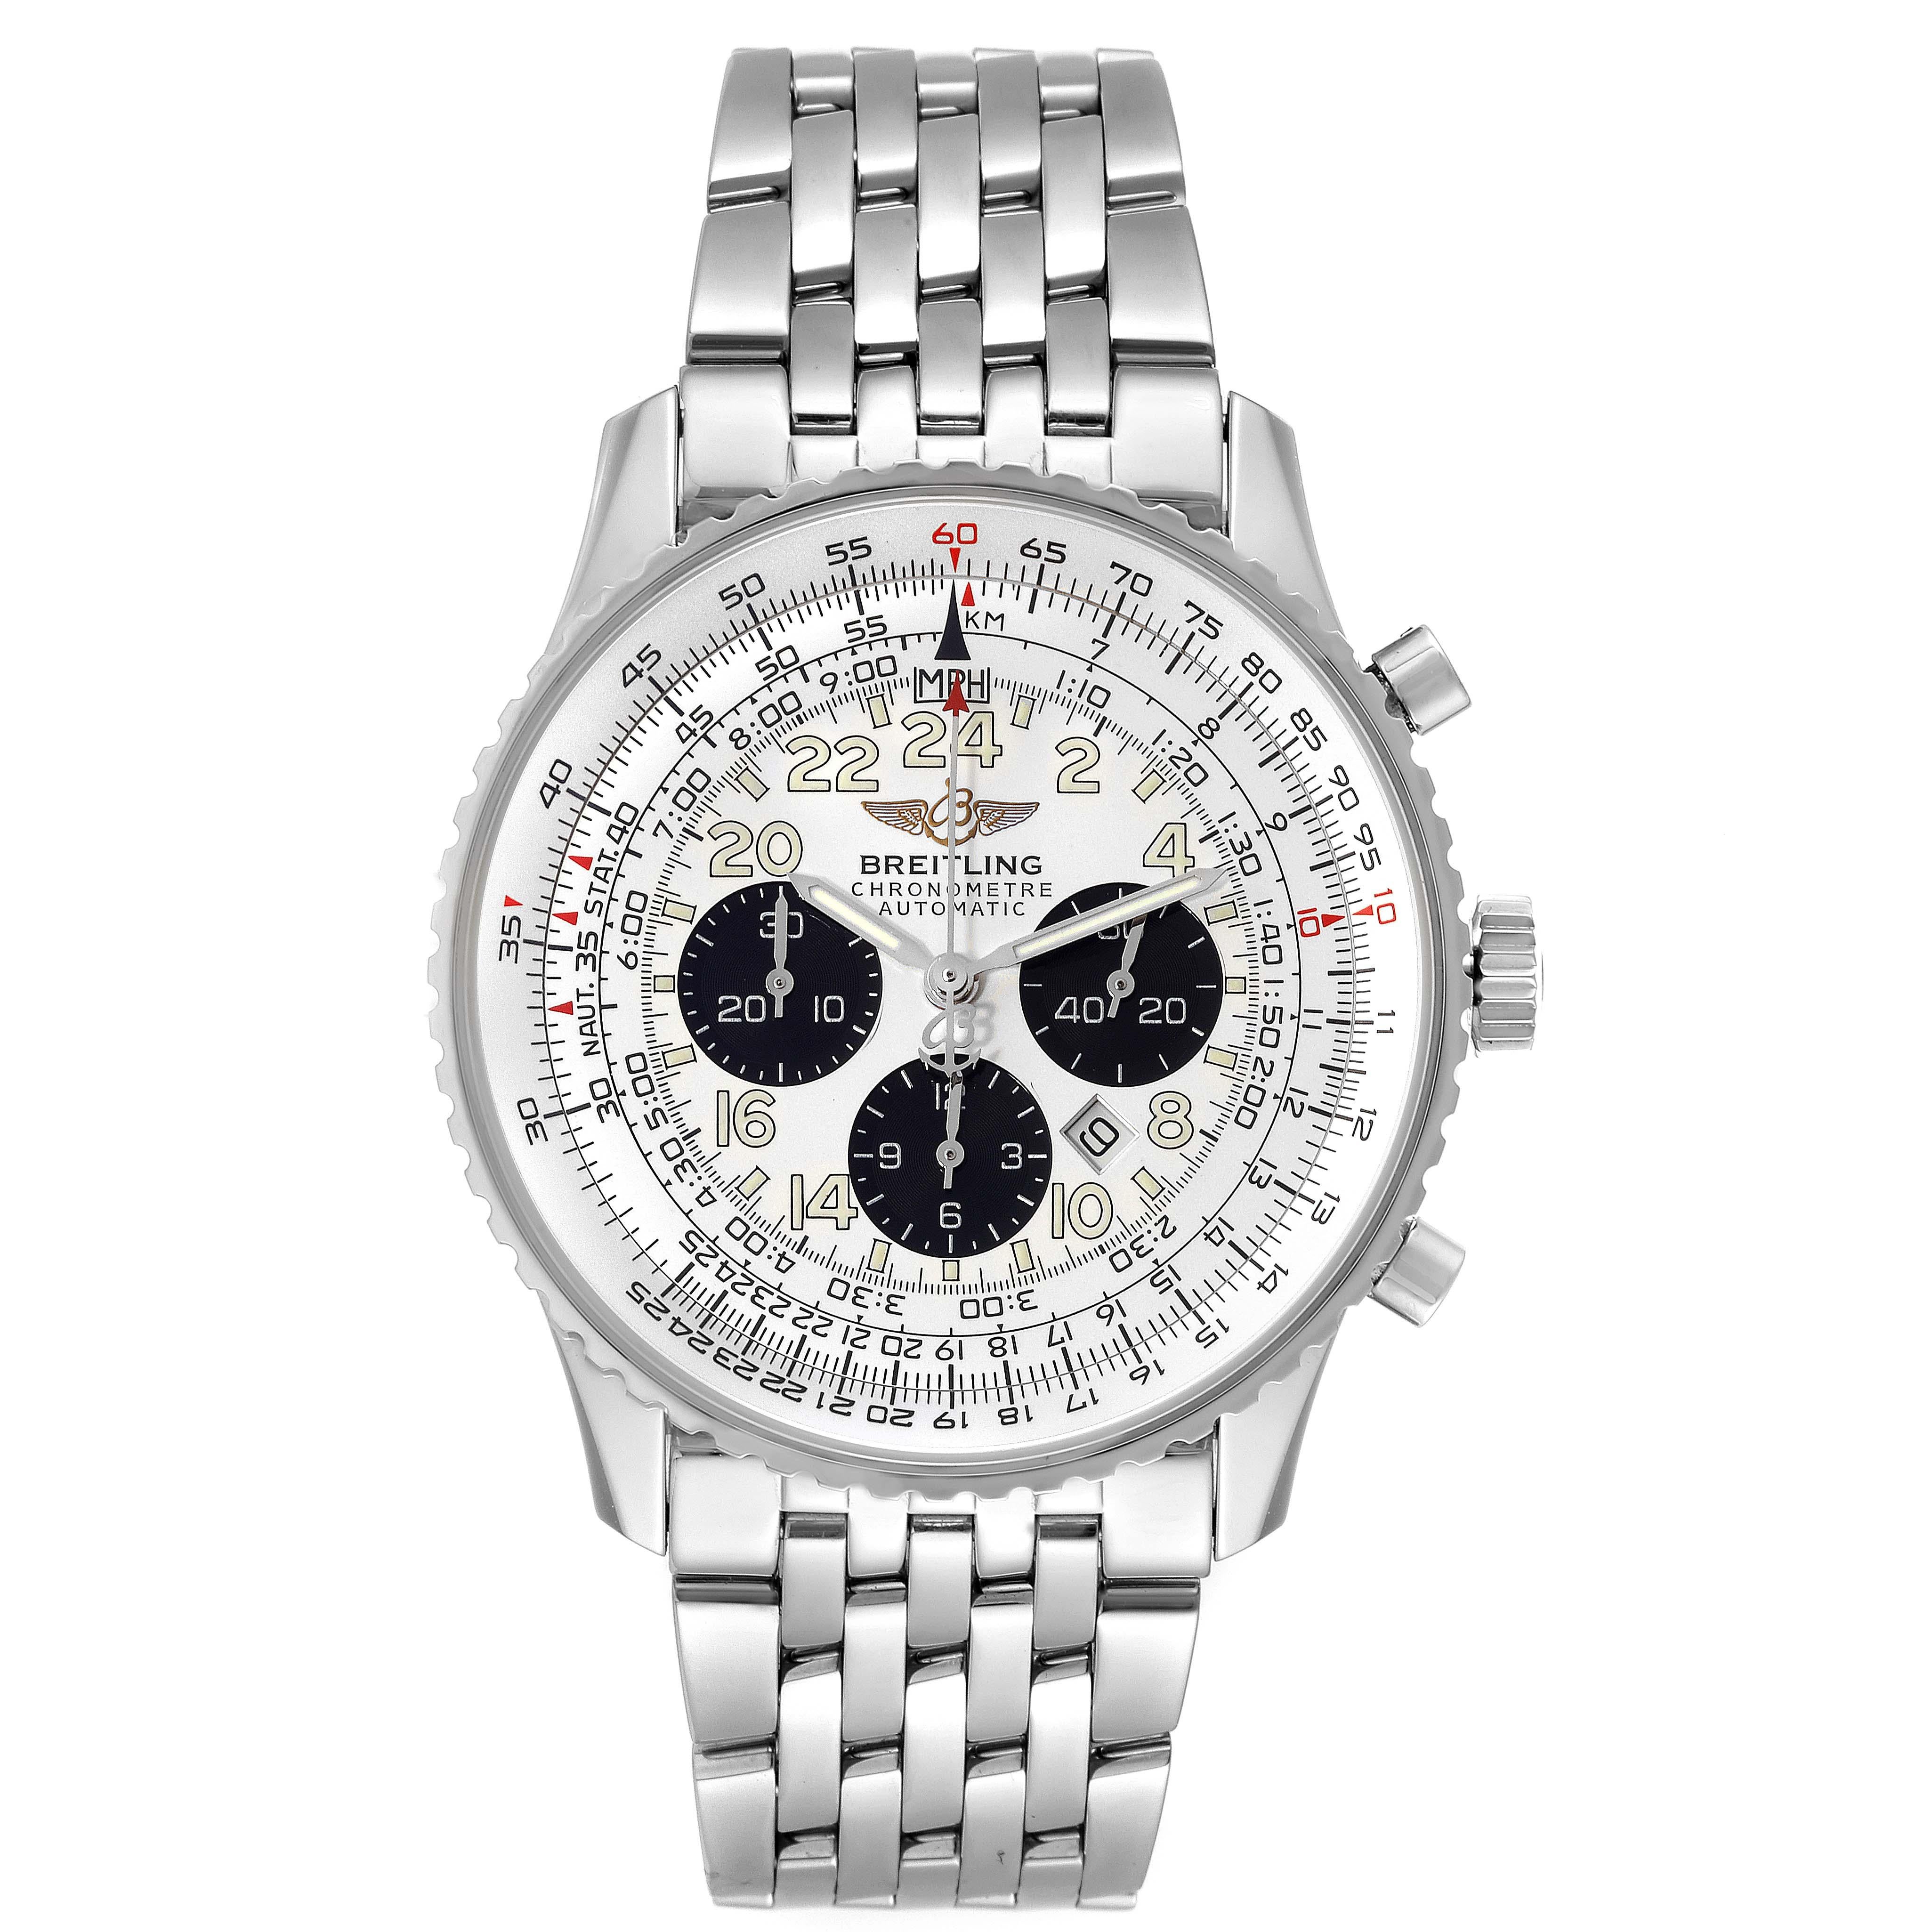 Breitling Navitimer Cosmonaute Silver Panda Dial Steel Mens Watch A22322. Automatic self-winding officially certified chronometer movement. Chronograph function. Stainless steel case 41.5 mm in diameter.  Stainless steel screwed-down crown and